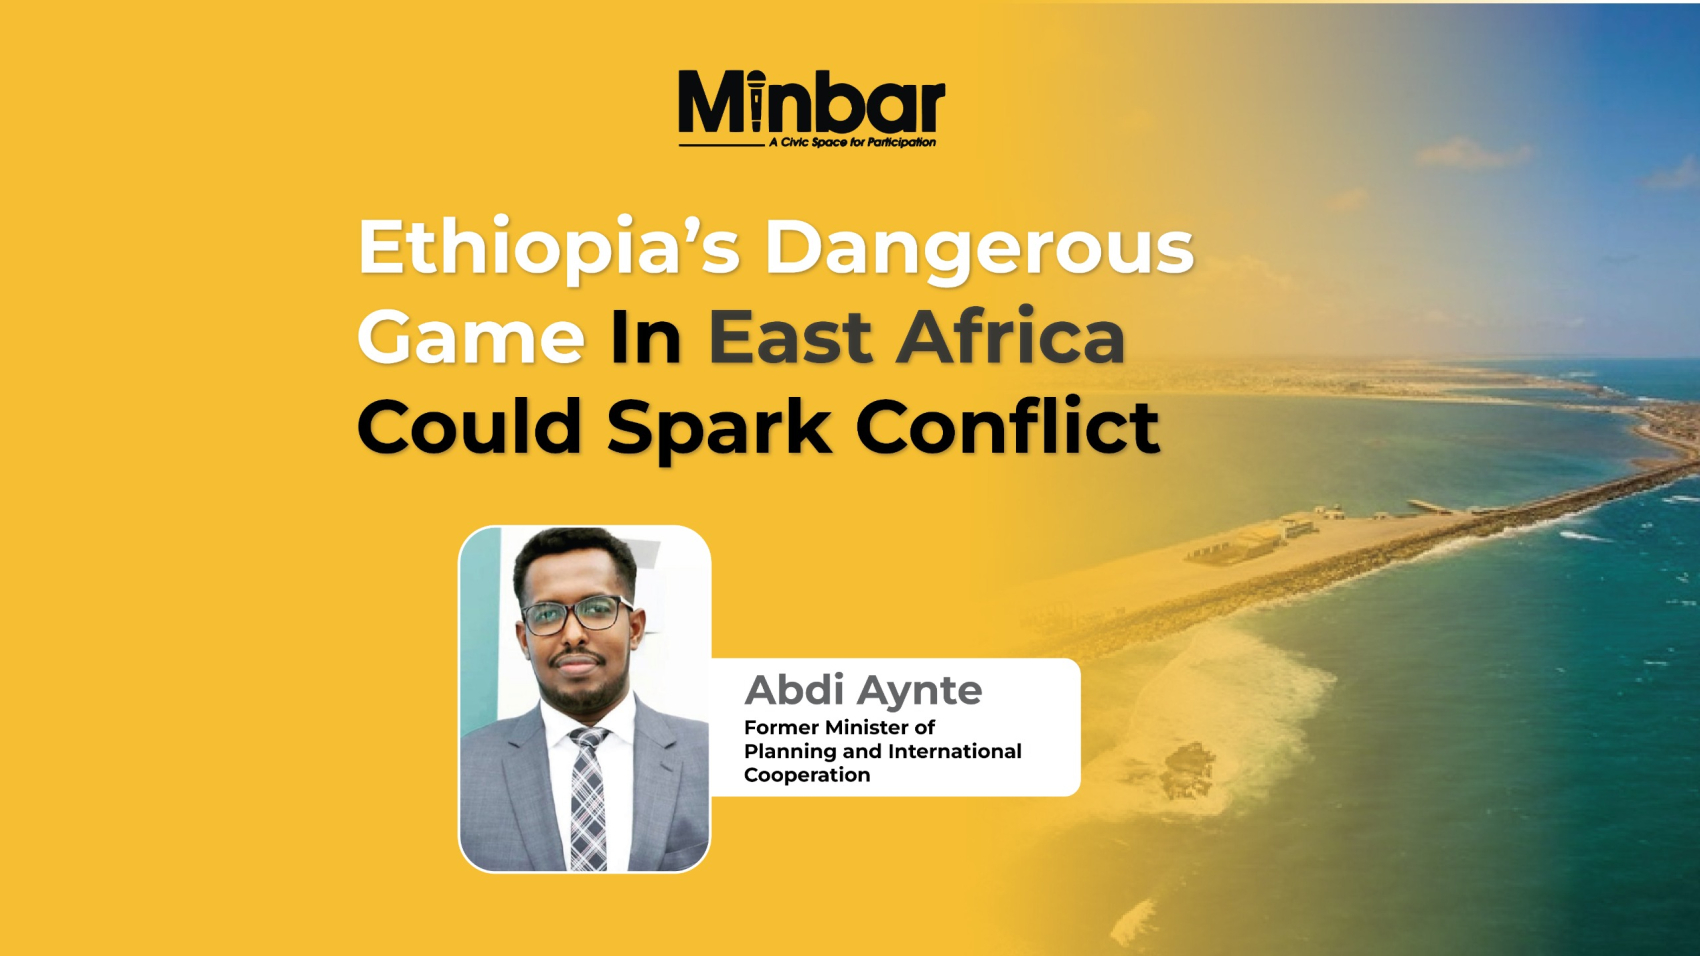 Ethiopia’s dangerous game in East Africa could spark conflict